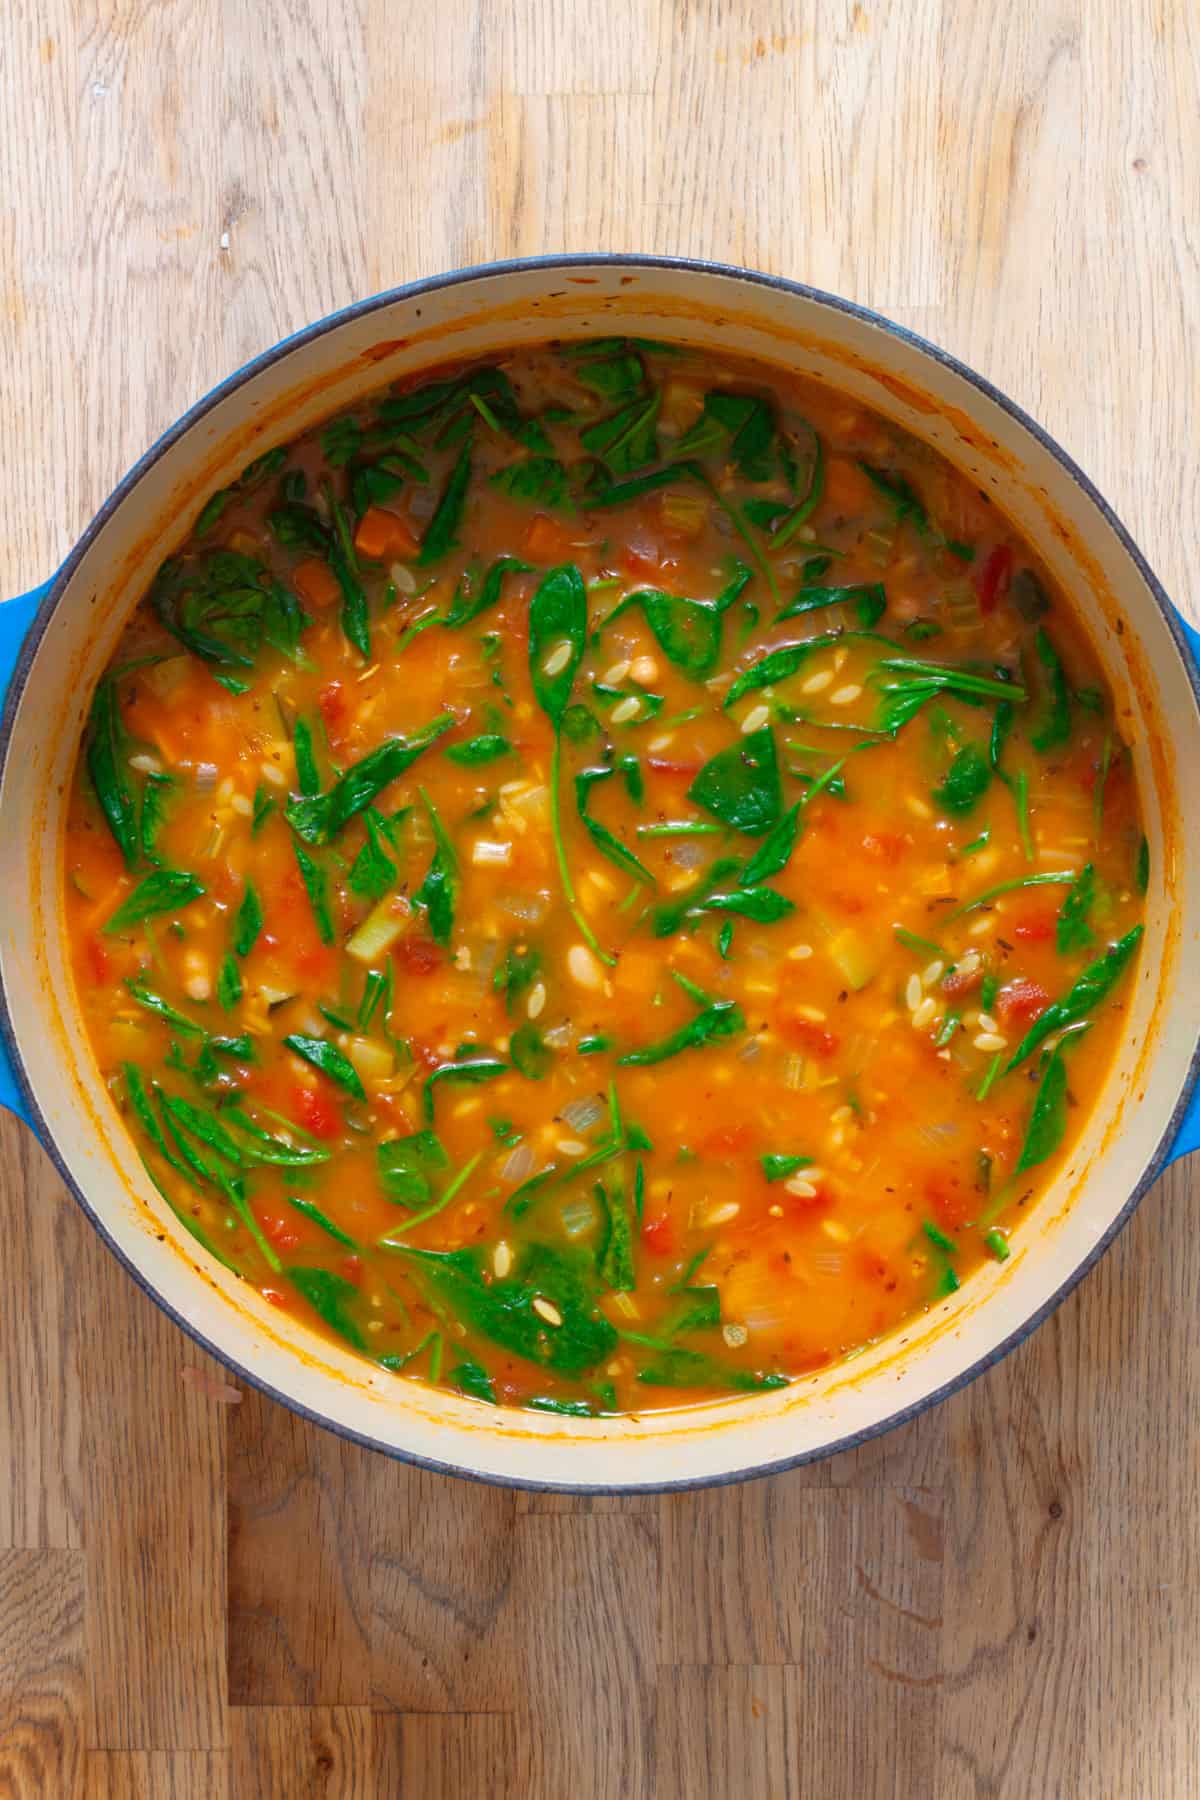 A blue Dutch oven with orzo vegetable soup with spinach and other vegetables.